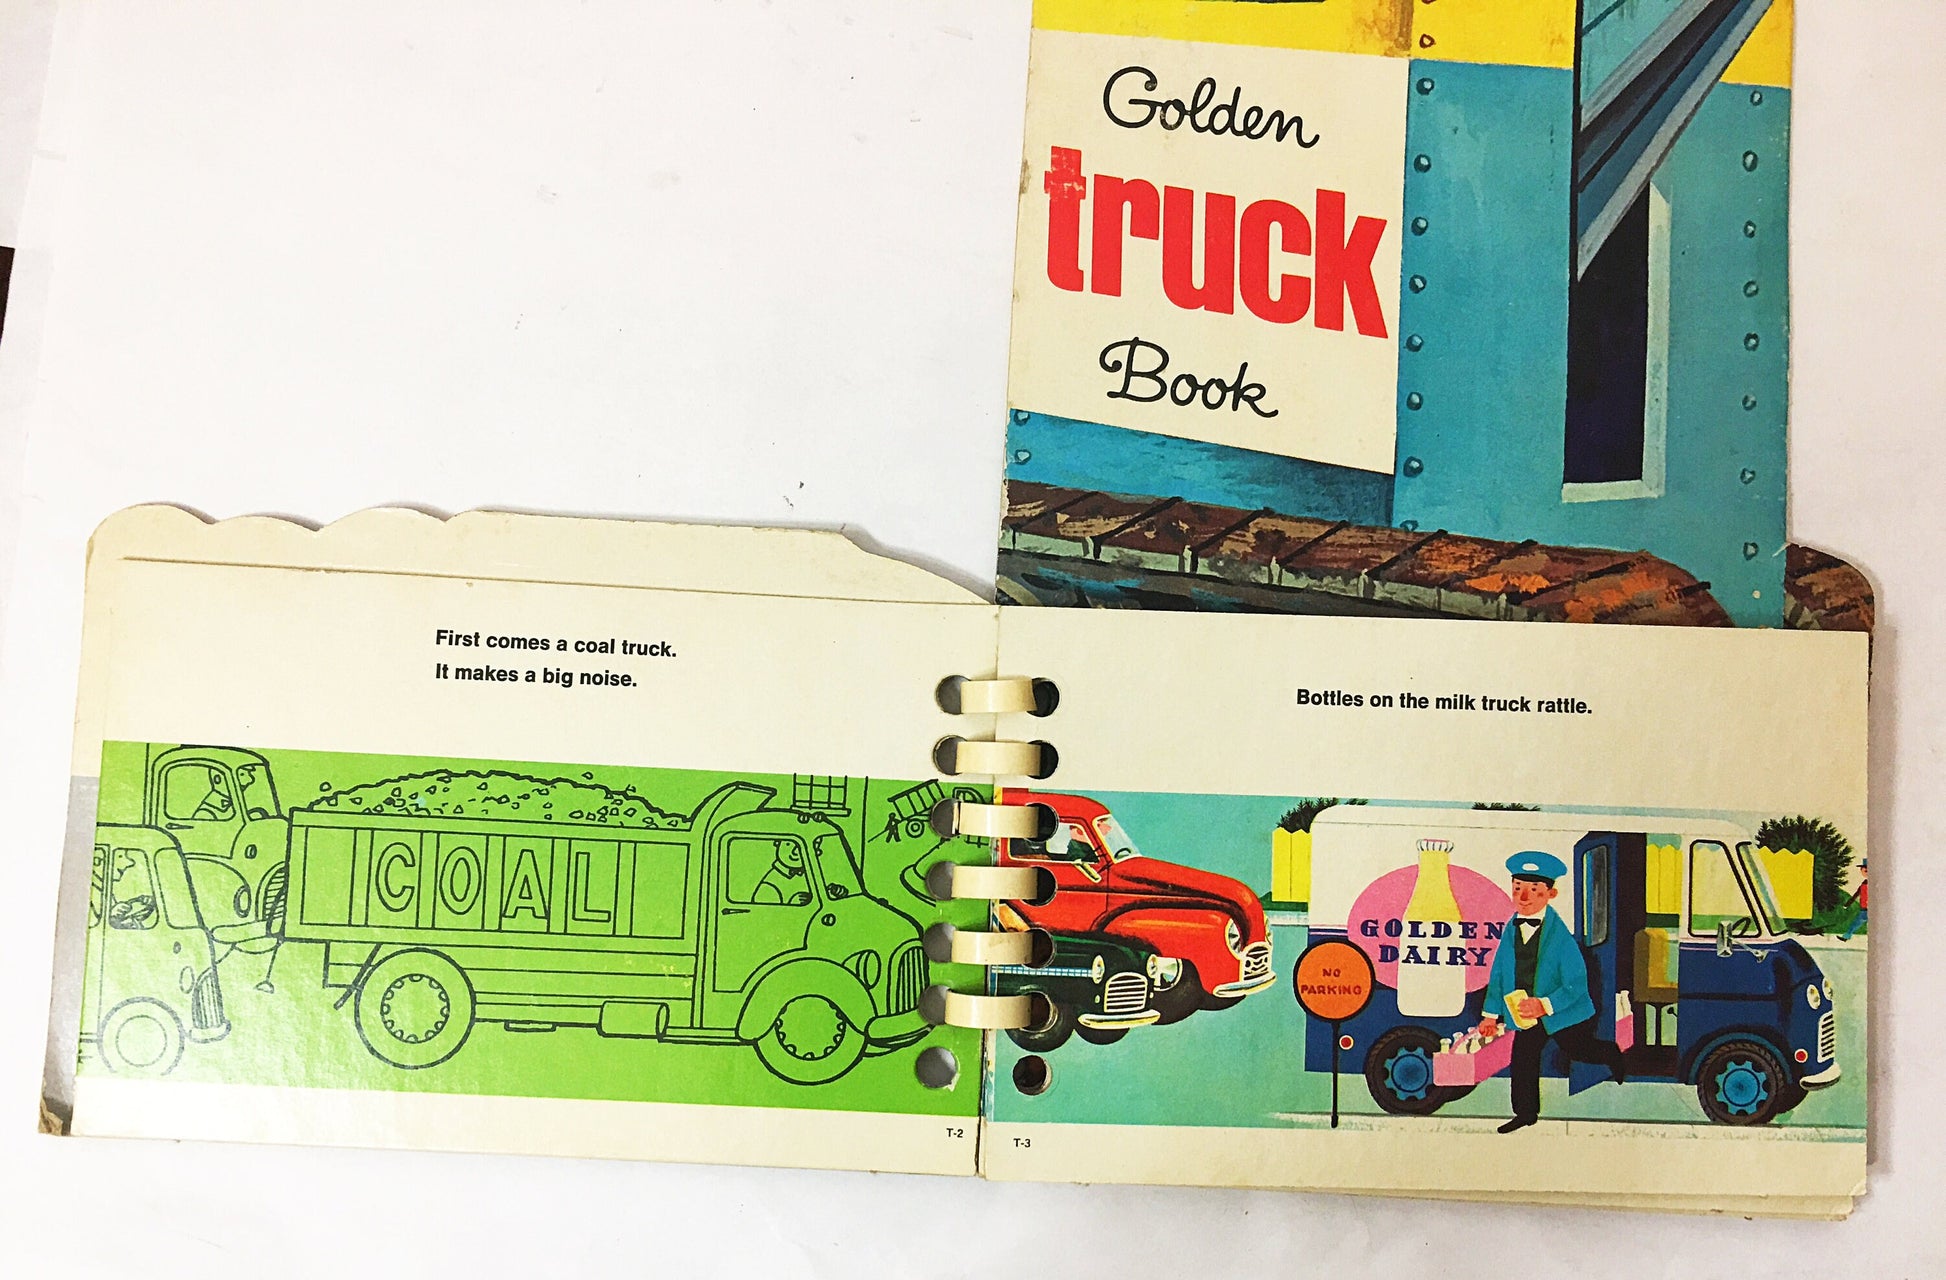 Golden Truck Book. Susan Witty and Bill Dugan. Play and Learn Golden Book circa 1969. Unmarked pages. Little Golden Book. Vintage